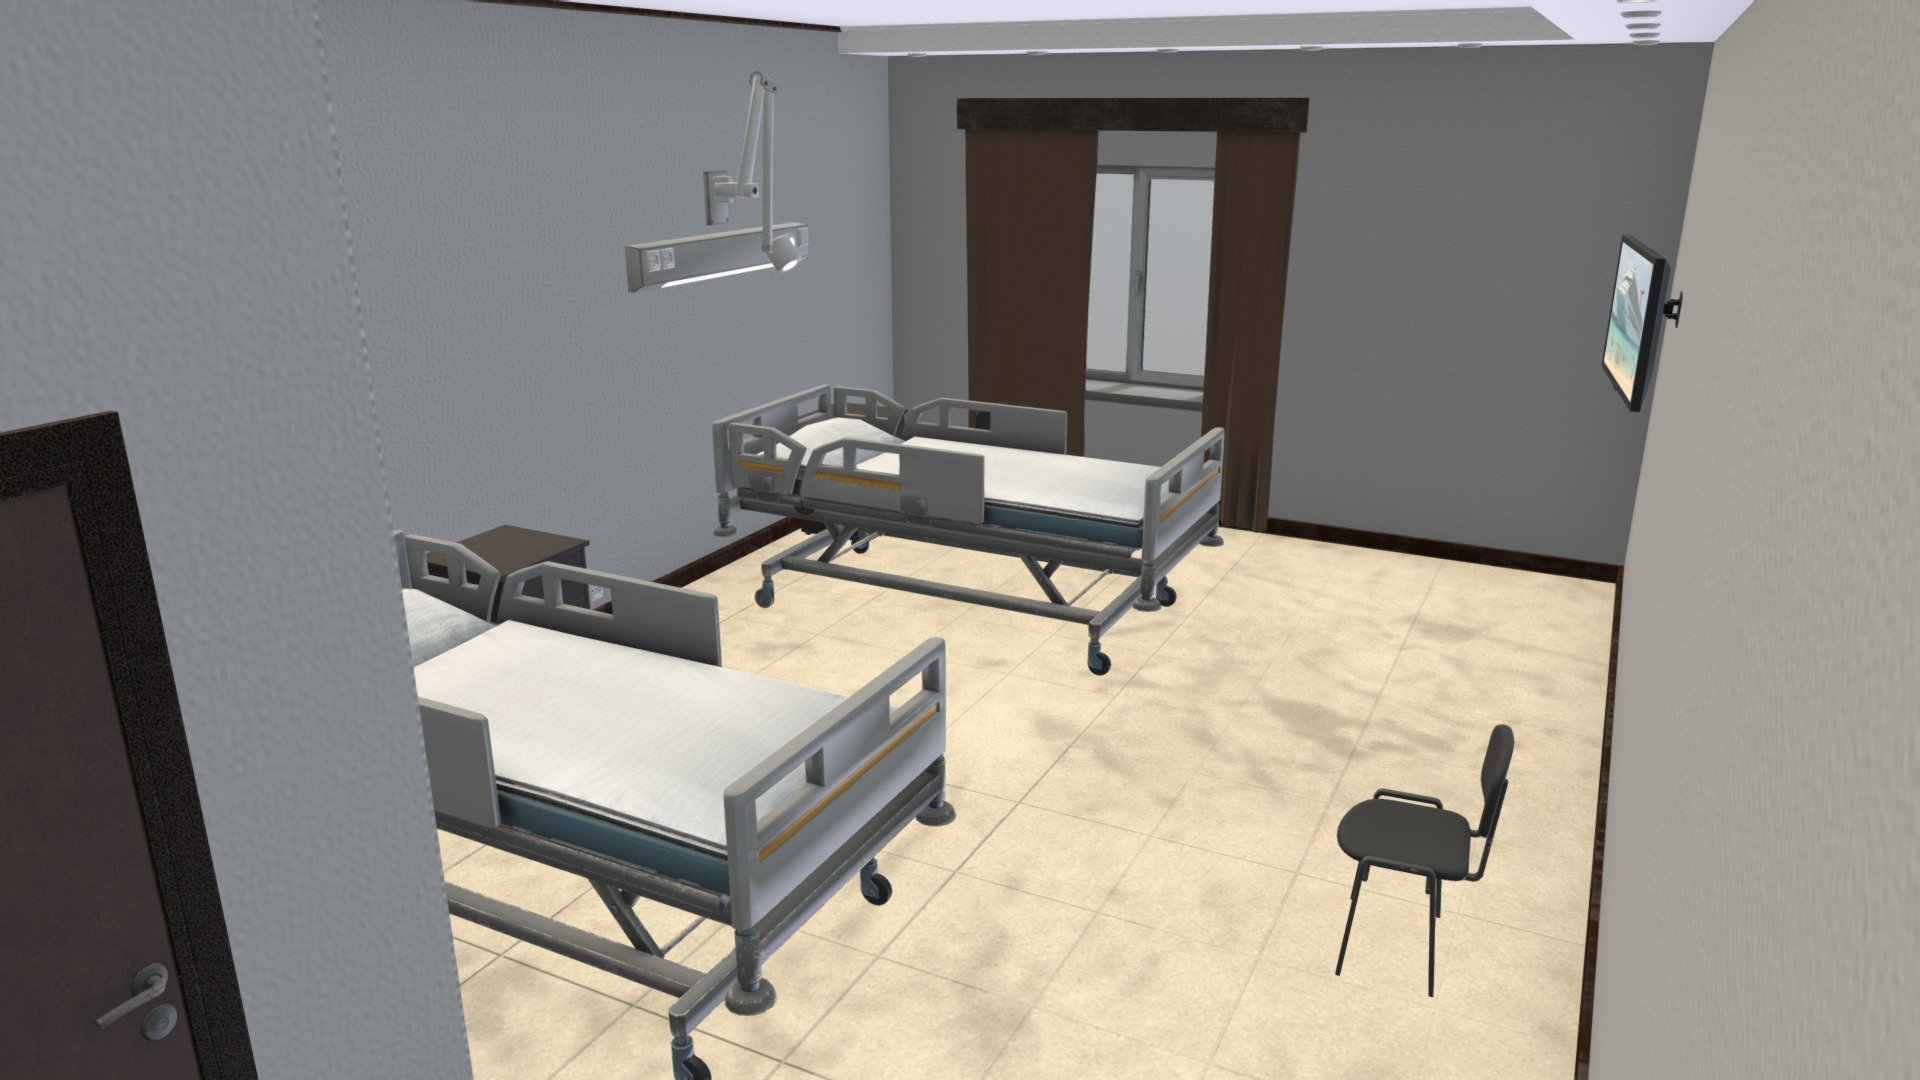 Interior for your game about the hospital.
Pack includes:
-Hospital room
-Hospital bed
-Chair
-Bedside table
-TV
-The lamp over the bed can rotate

models windows and door you can open 3d model